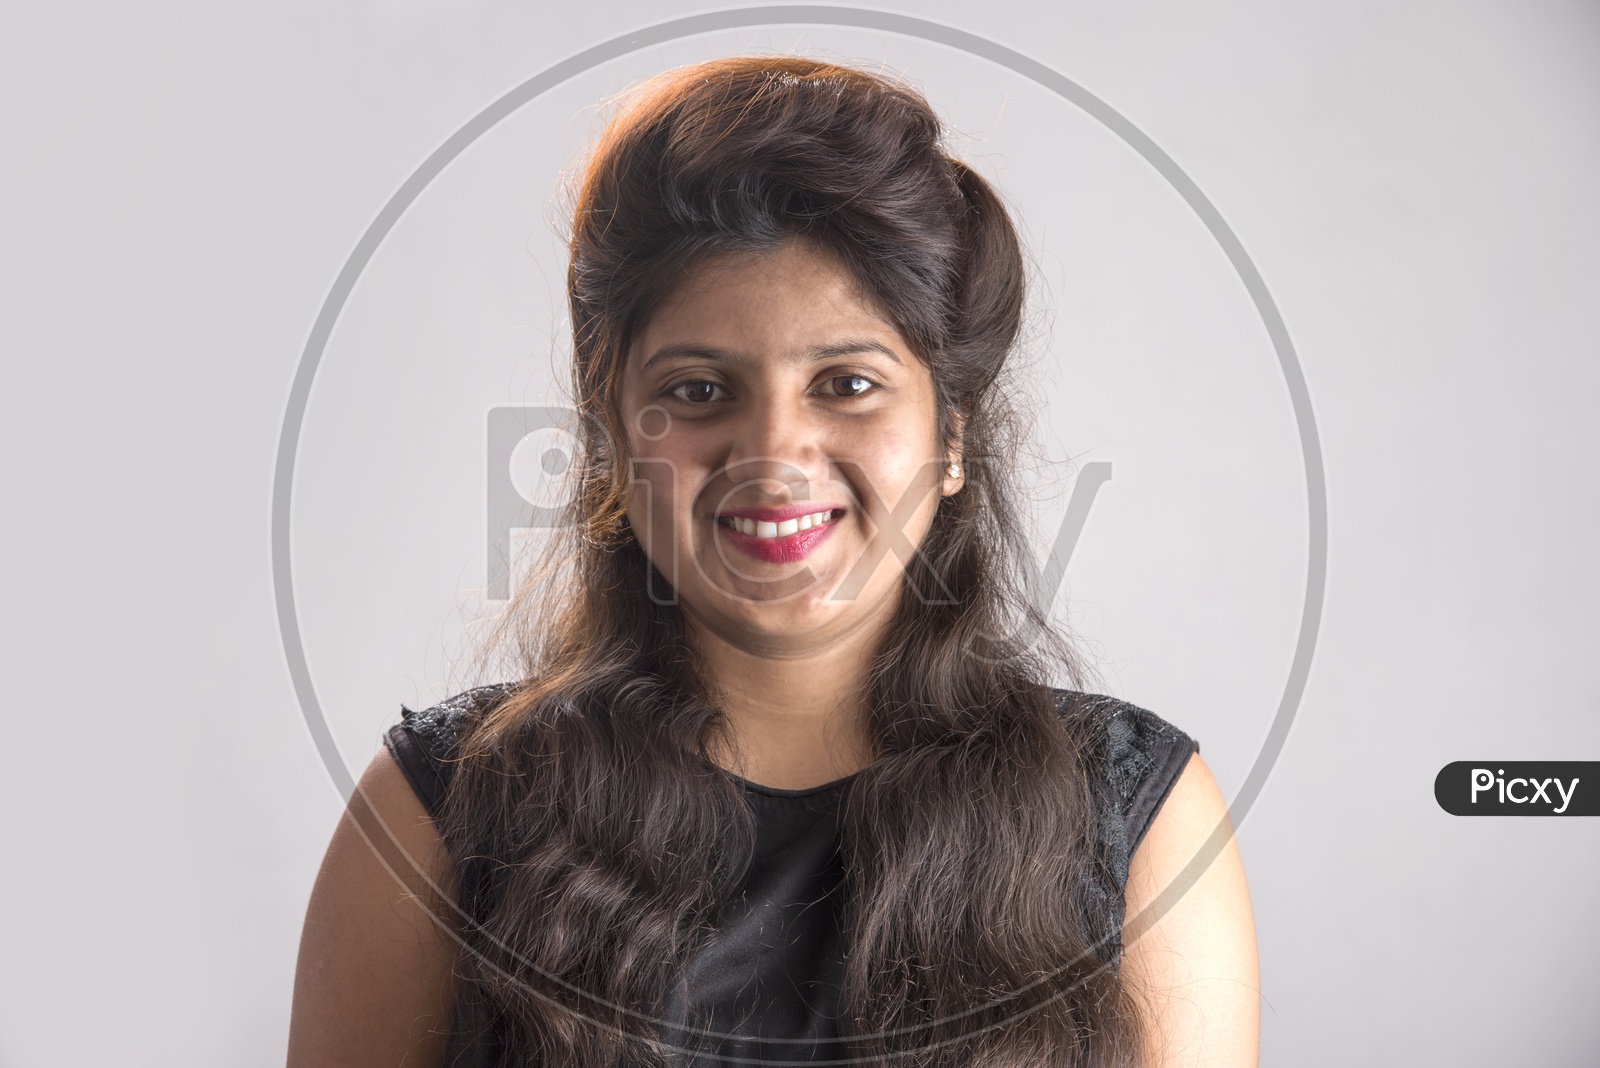 Portrait of a Pretty Young Woman  With Smile Face and Posing Over am Isolated White Background